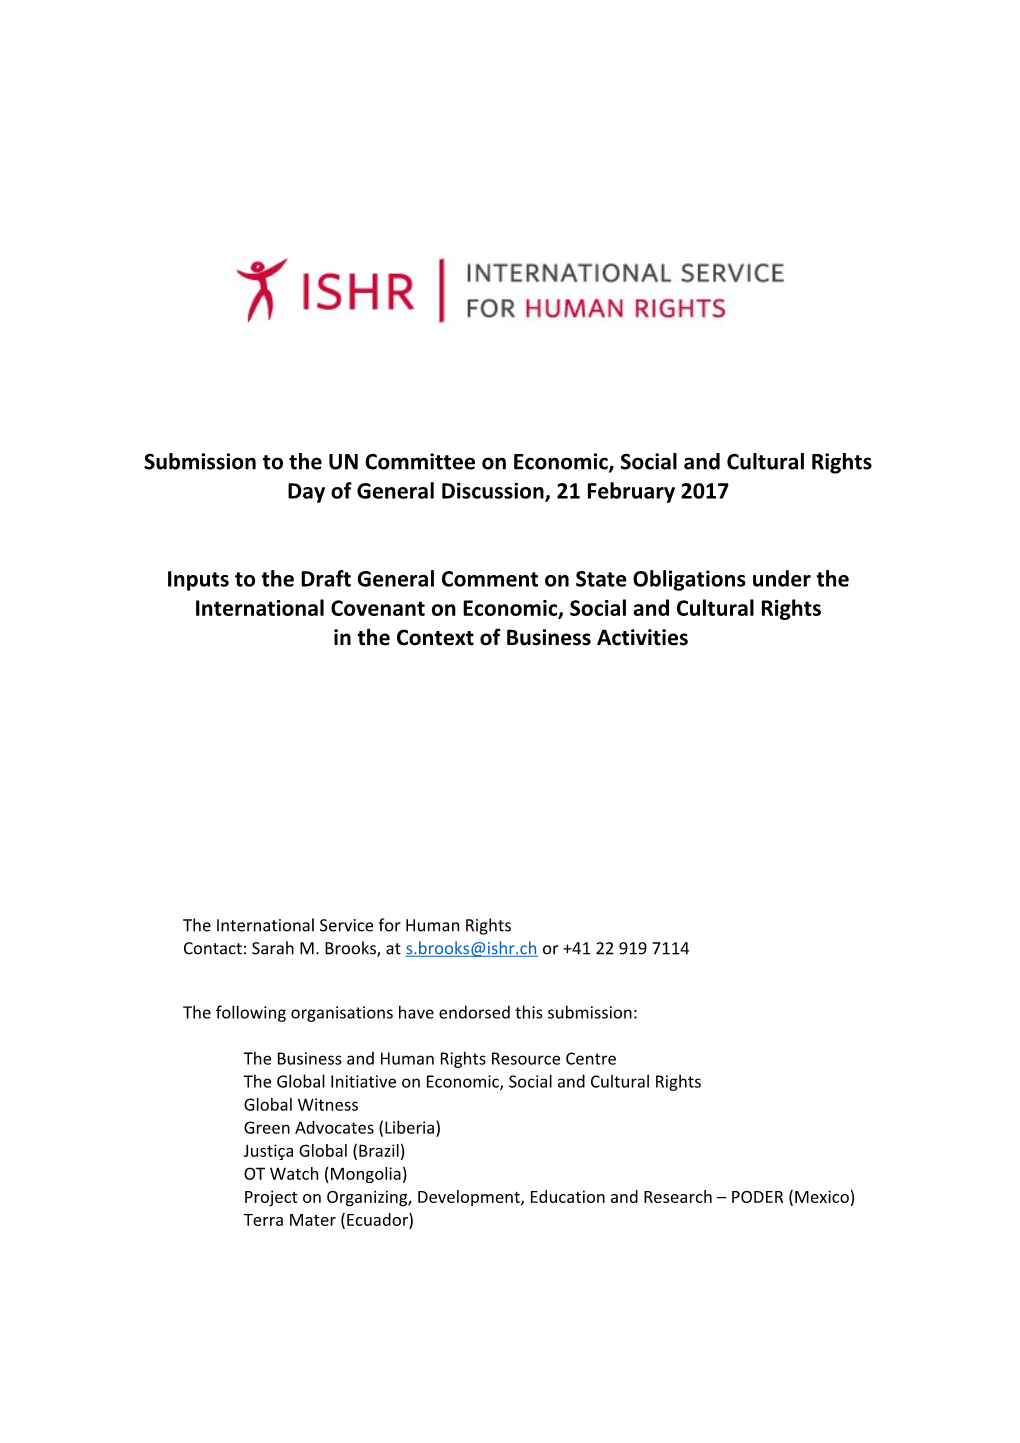 Submission to the UN Committee on Economic, Social and Cultural Rights